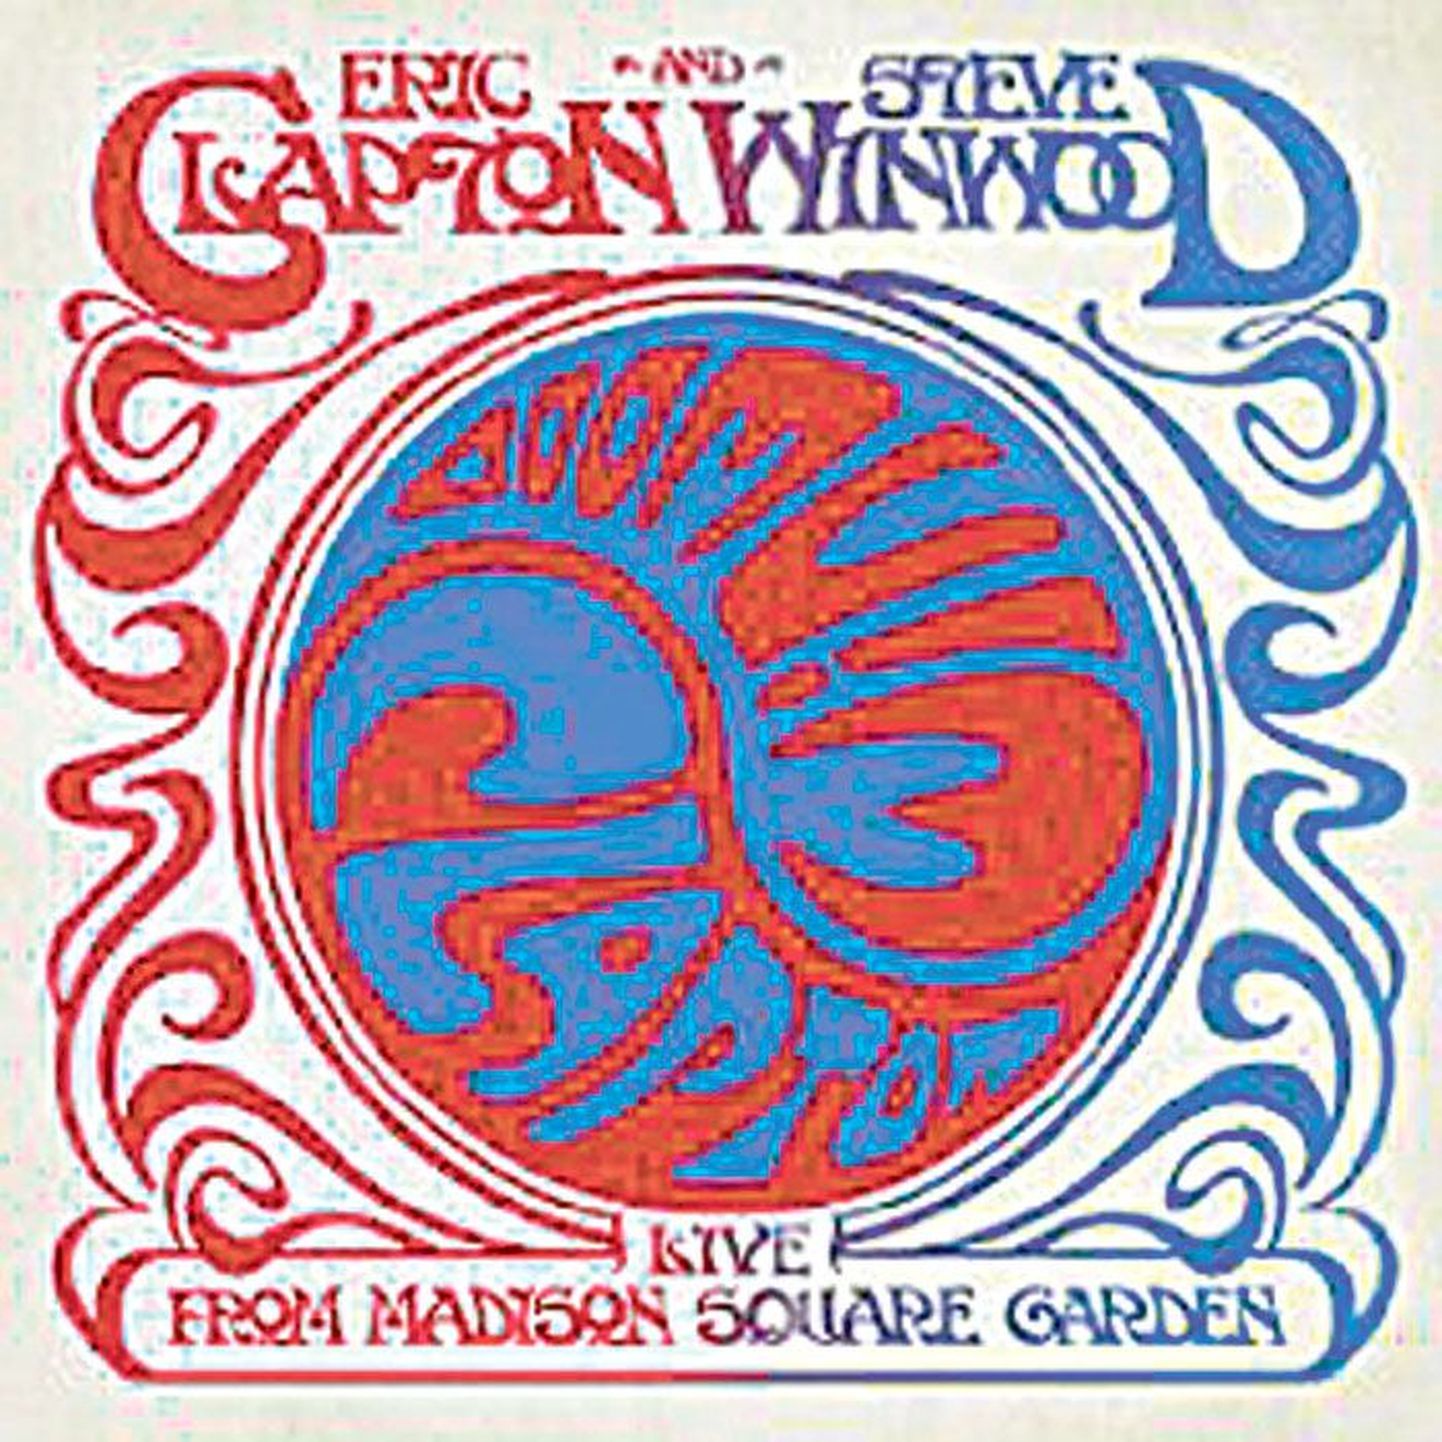 Eric Clapton and Steve Winwood
Live From Madison Square Garden (Reprise)